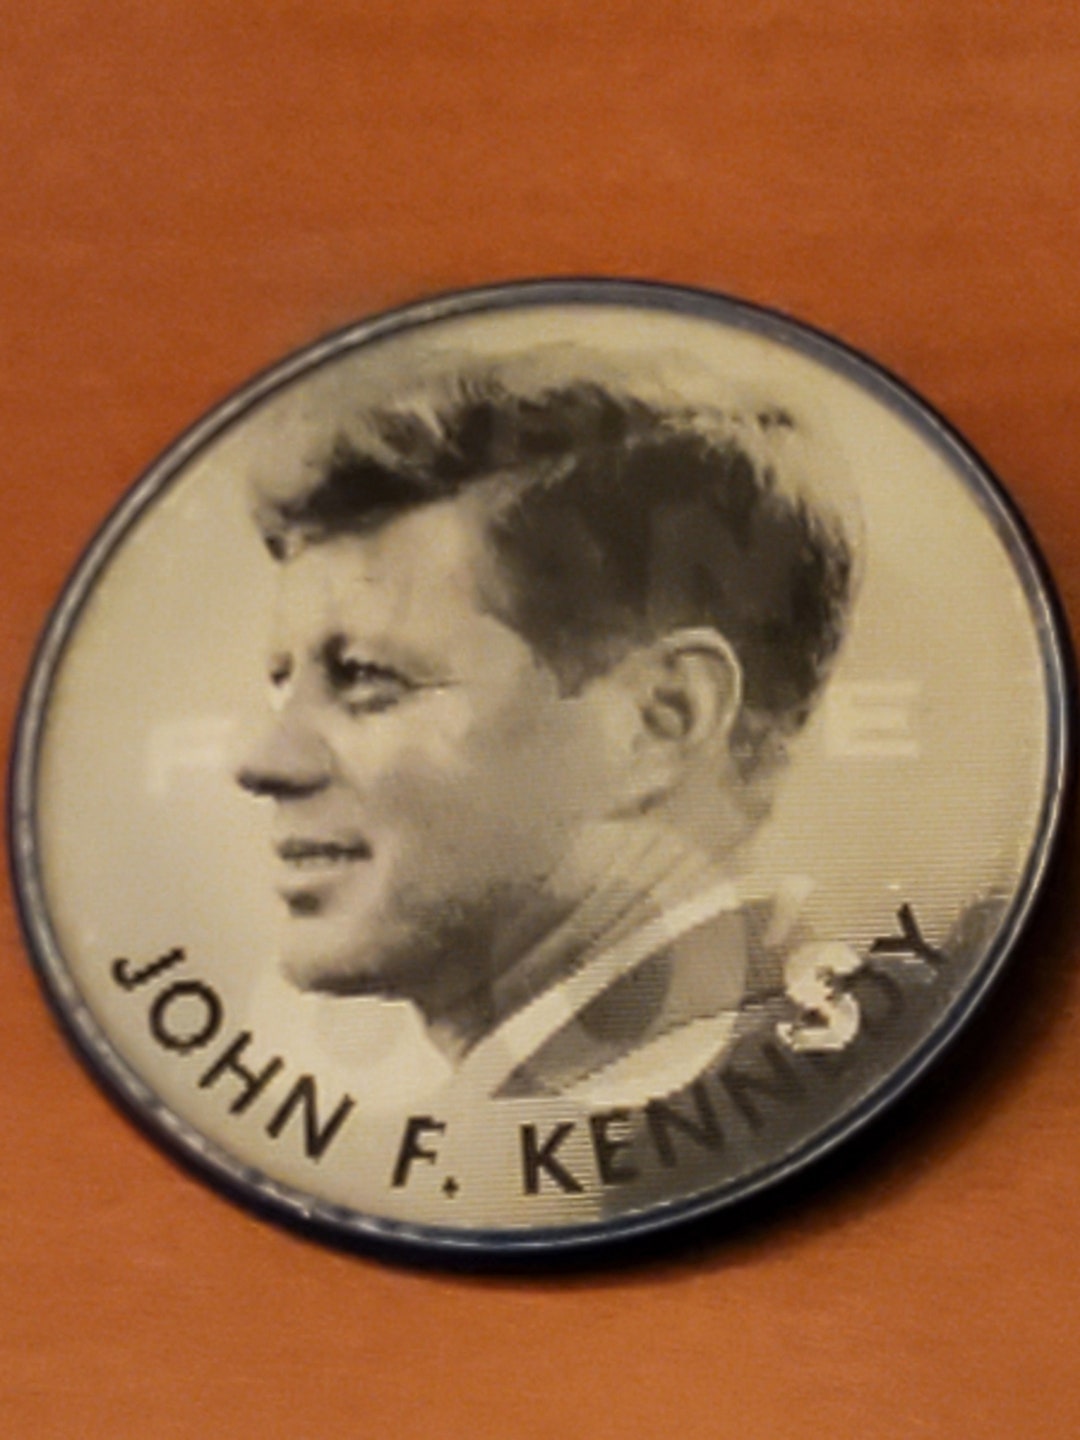 John F Kennedy Campaign Button By Vari Vue Etsy